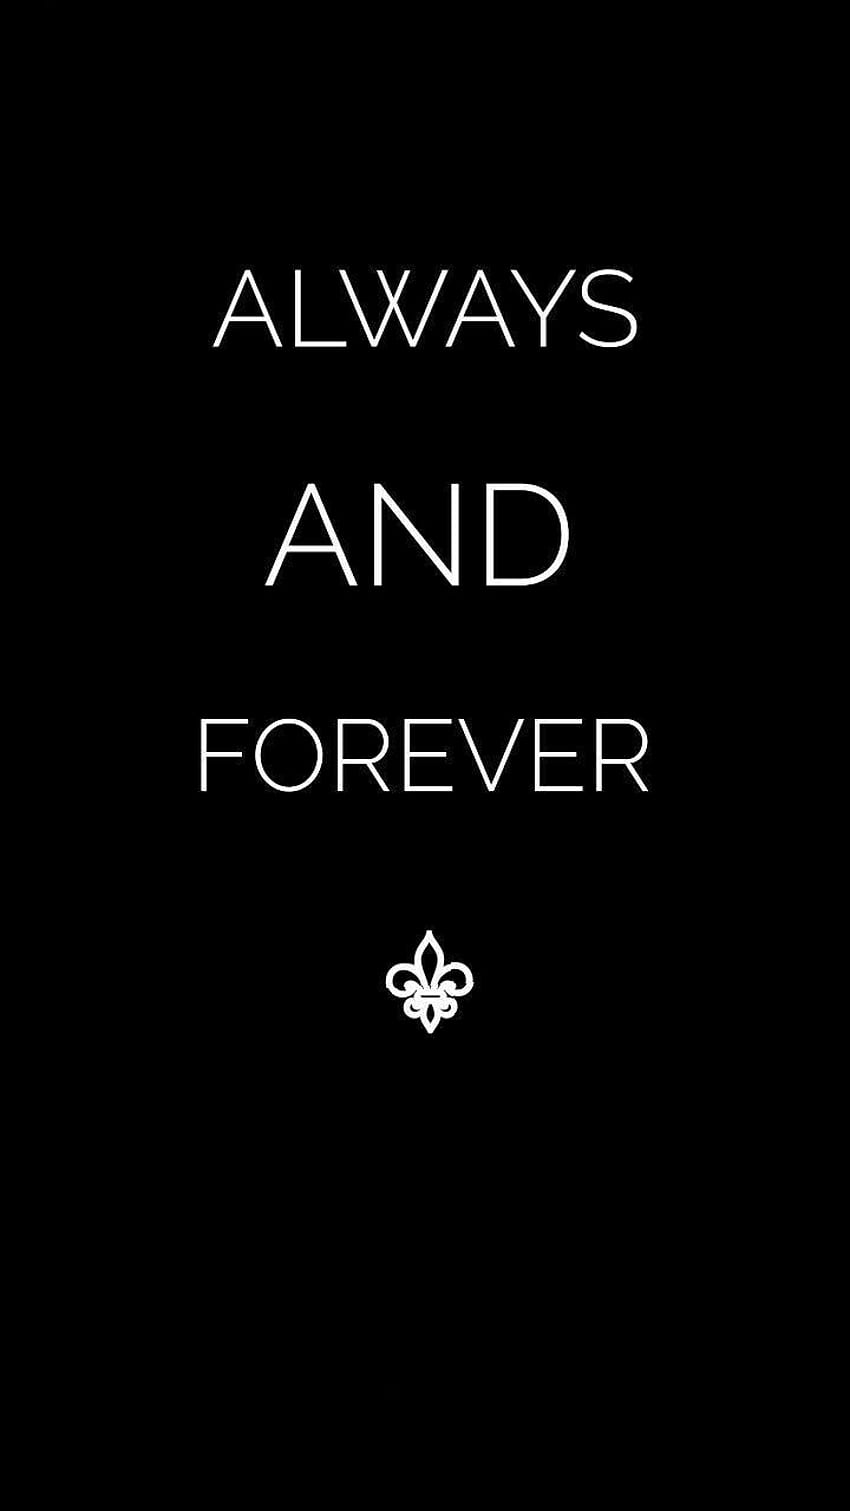 Forever  Always Phone Wallpaper Background  Love wallpaper Inspirational  wallpapers Phone wallpaper quotes